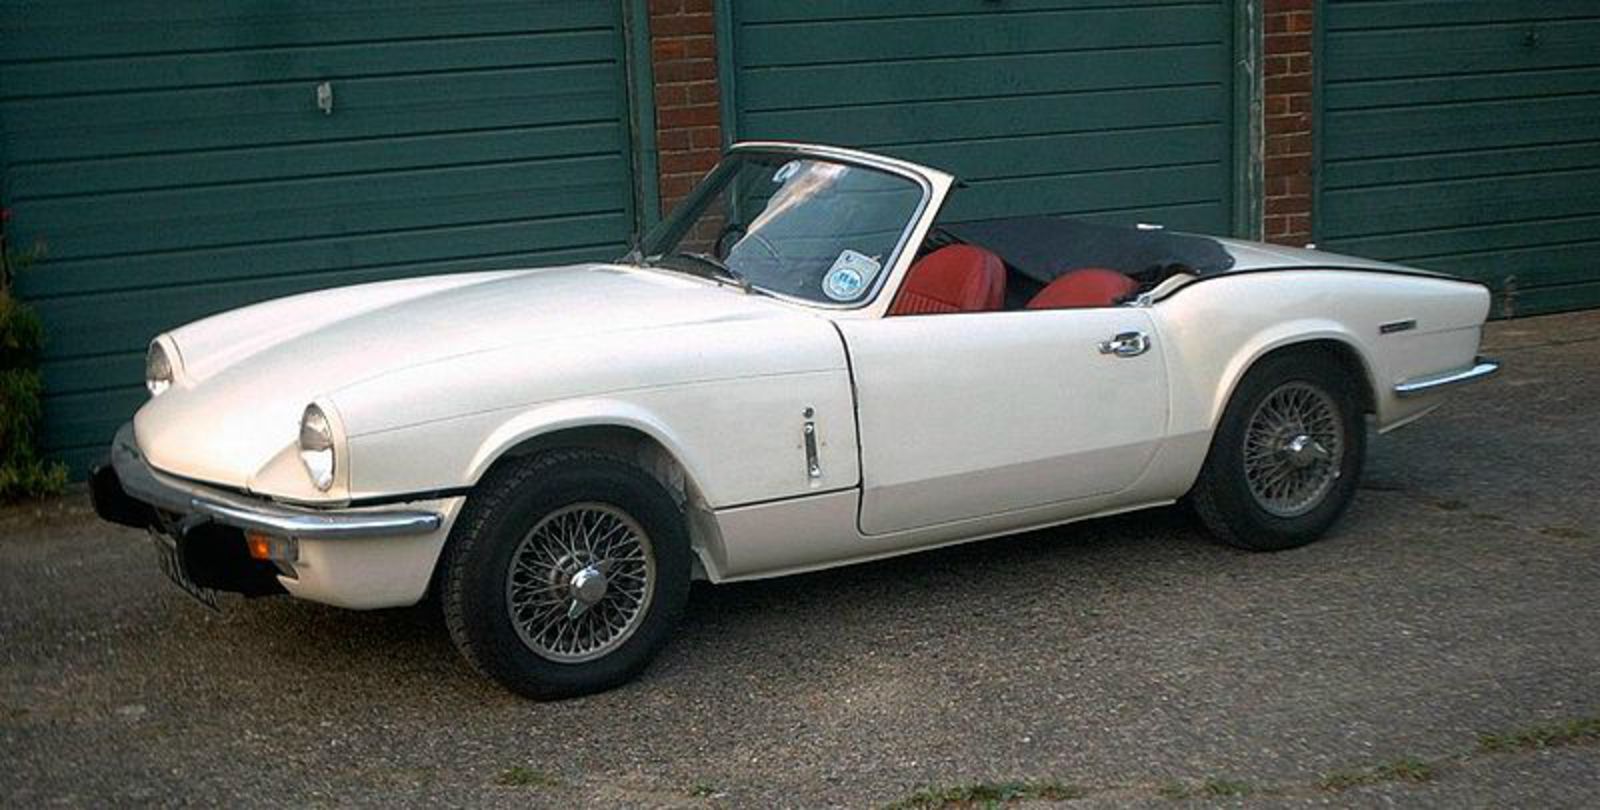 Used Triumph Spitfire for Sale by Owner: Buy Cheap Triumph Convertible